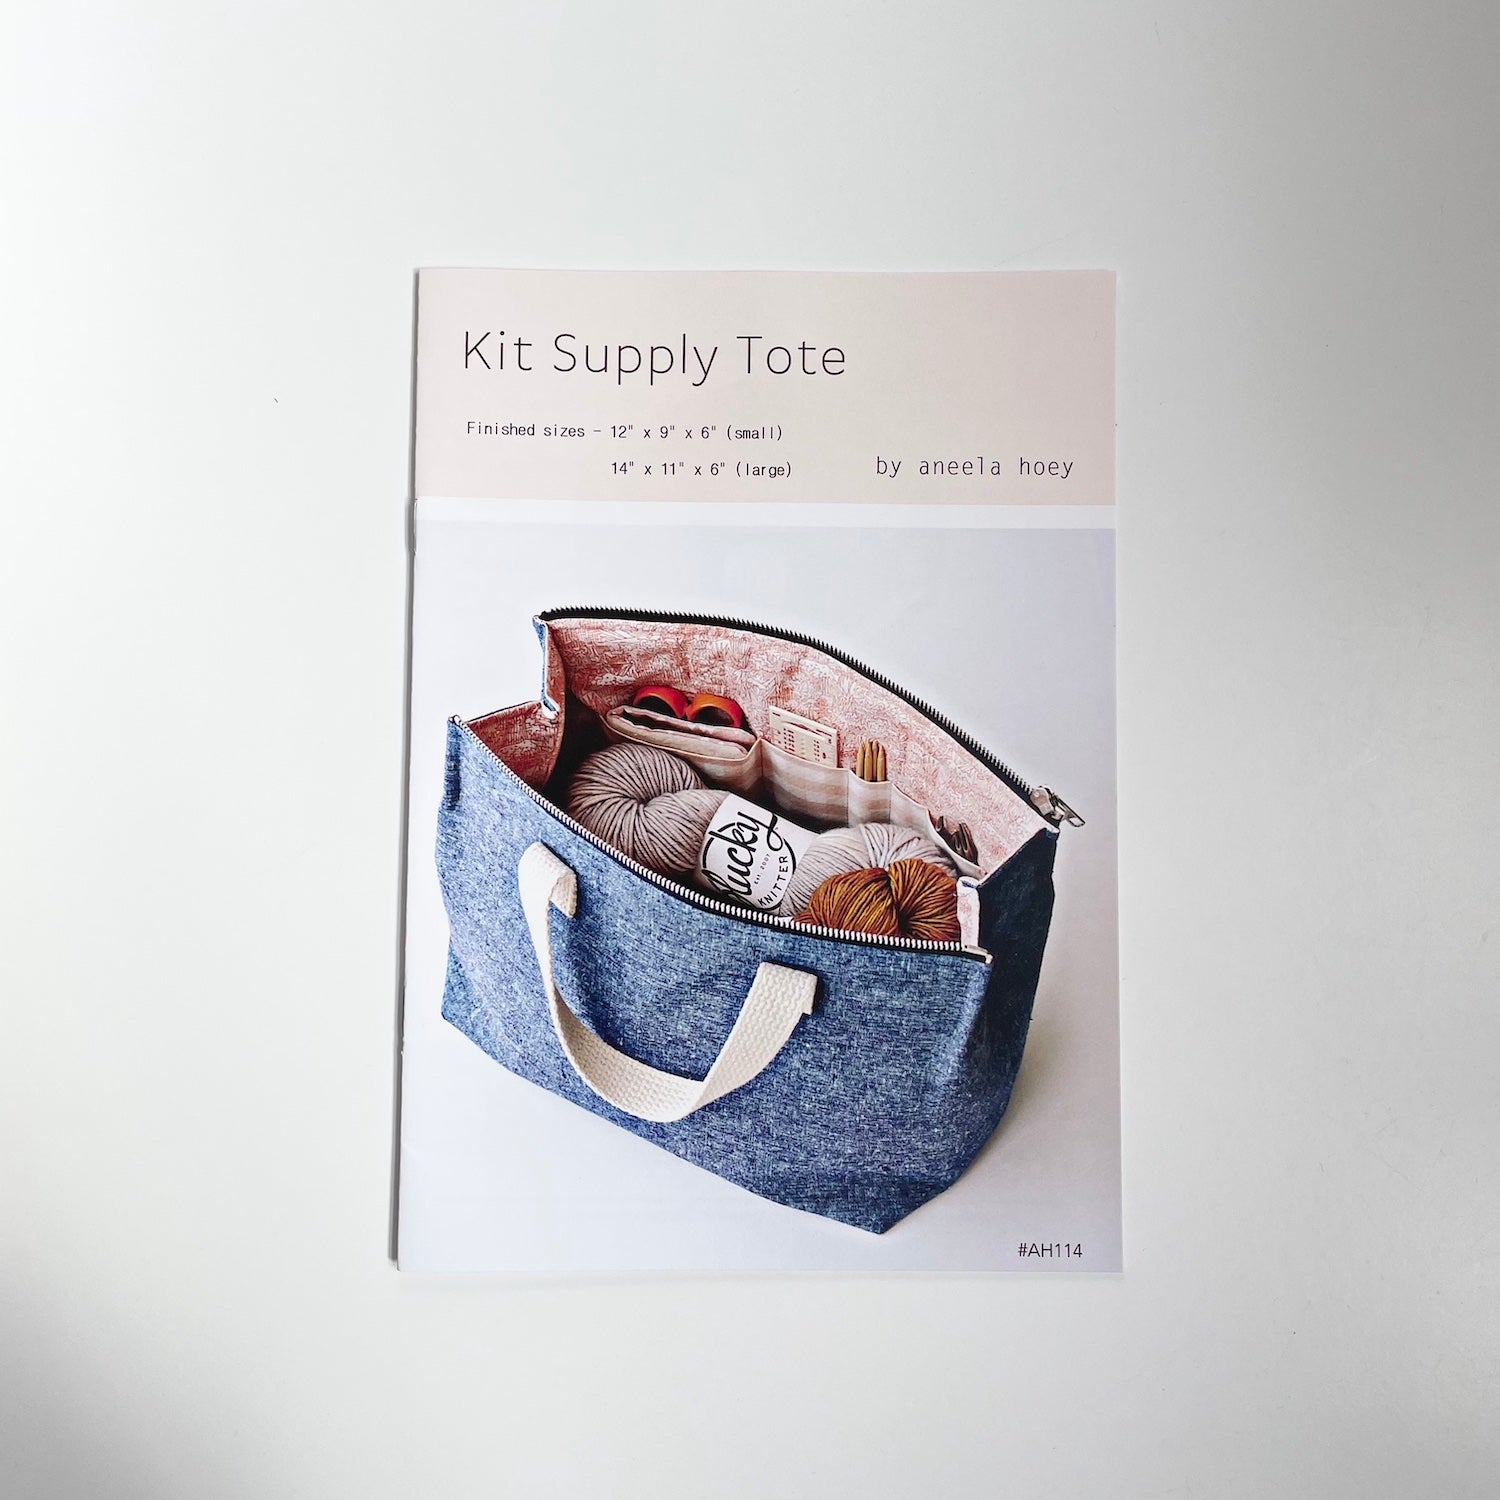 Aneela Hoey Patterns : Kit Supply Tote